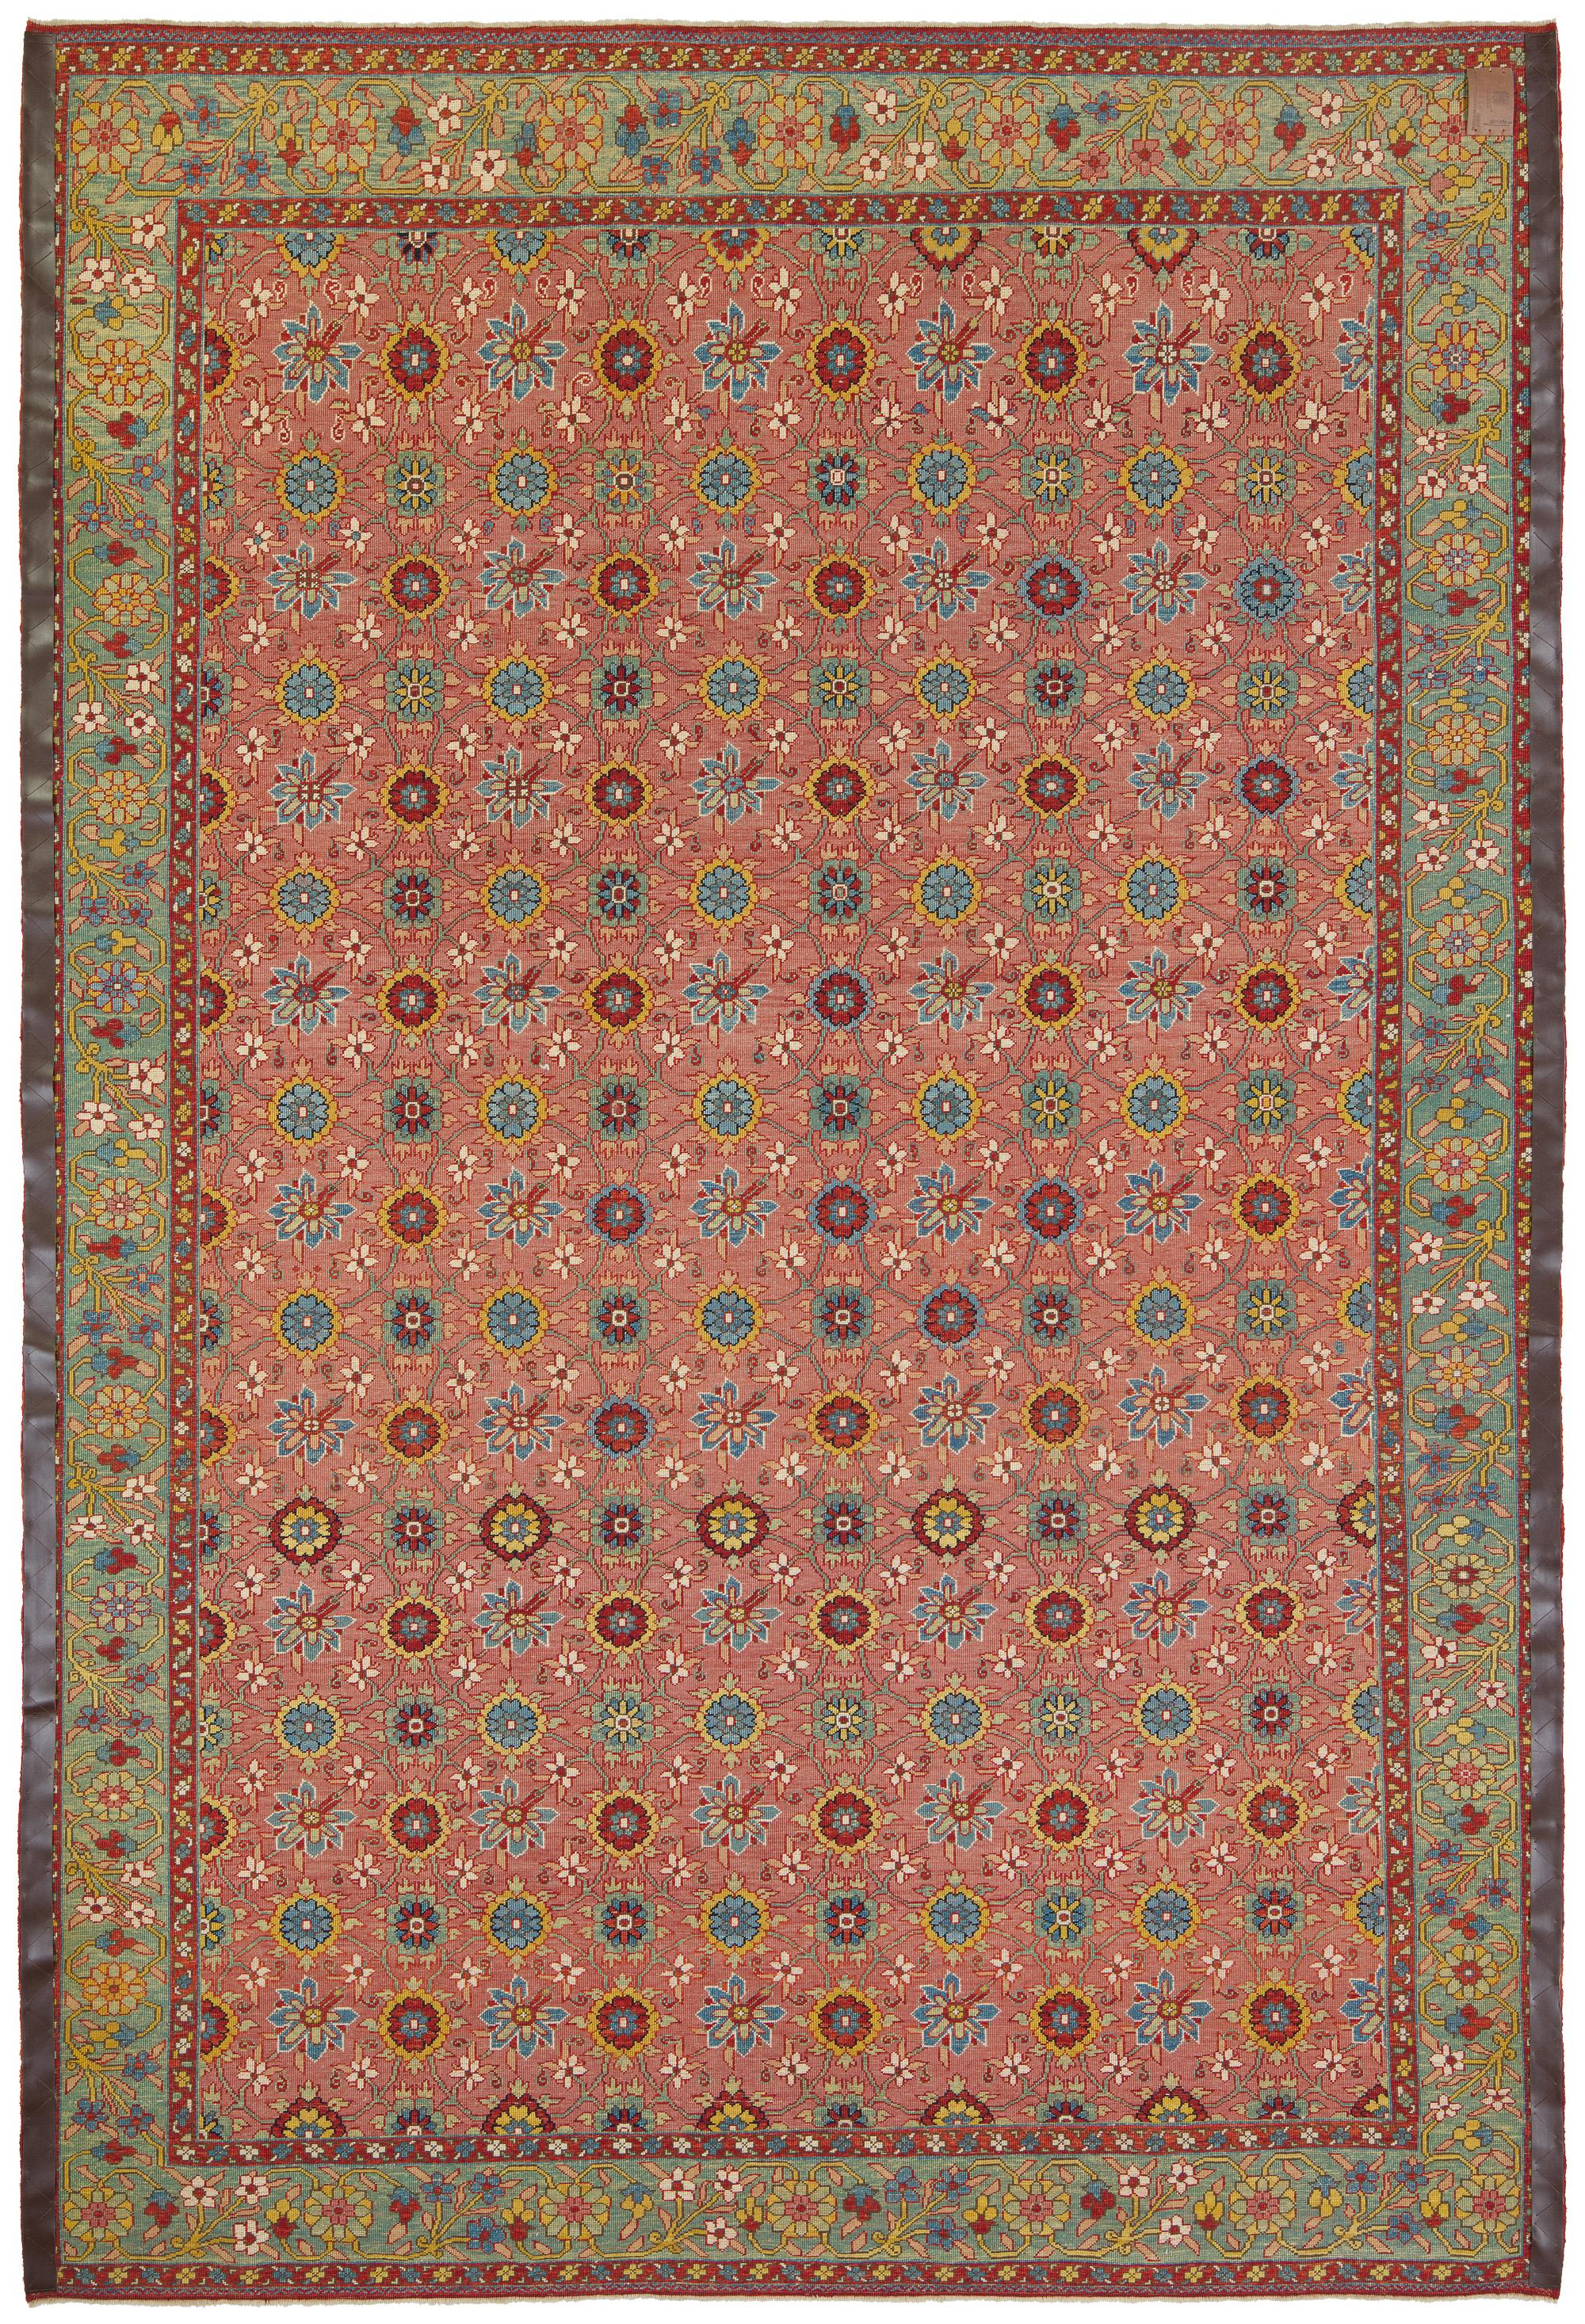 The source of the rug comes from the book Antique Rugs of Kurdistan A Historical Legacy of Woven Art, James D. Burns, 2002 nr.2. This was an exclusive example of a Mina Khani lattice design Mid-19th Century rug from Koliya’i, Southern Kurdistan